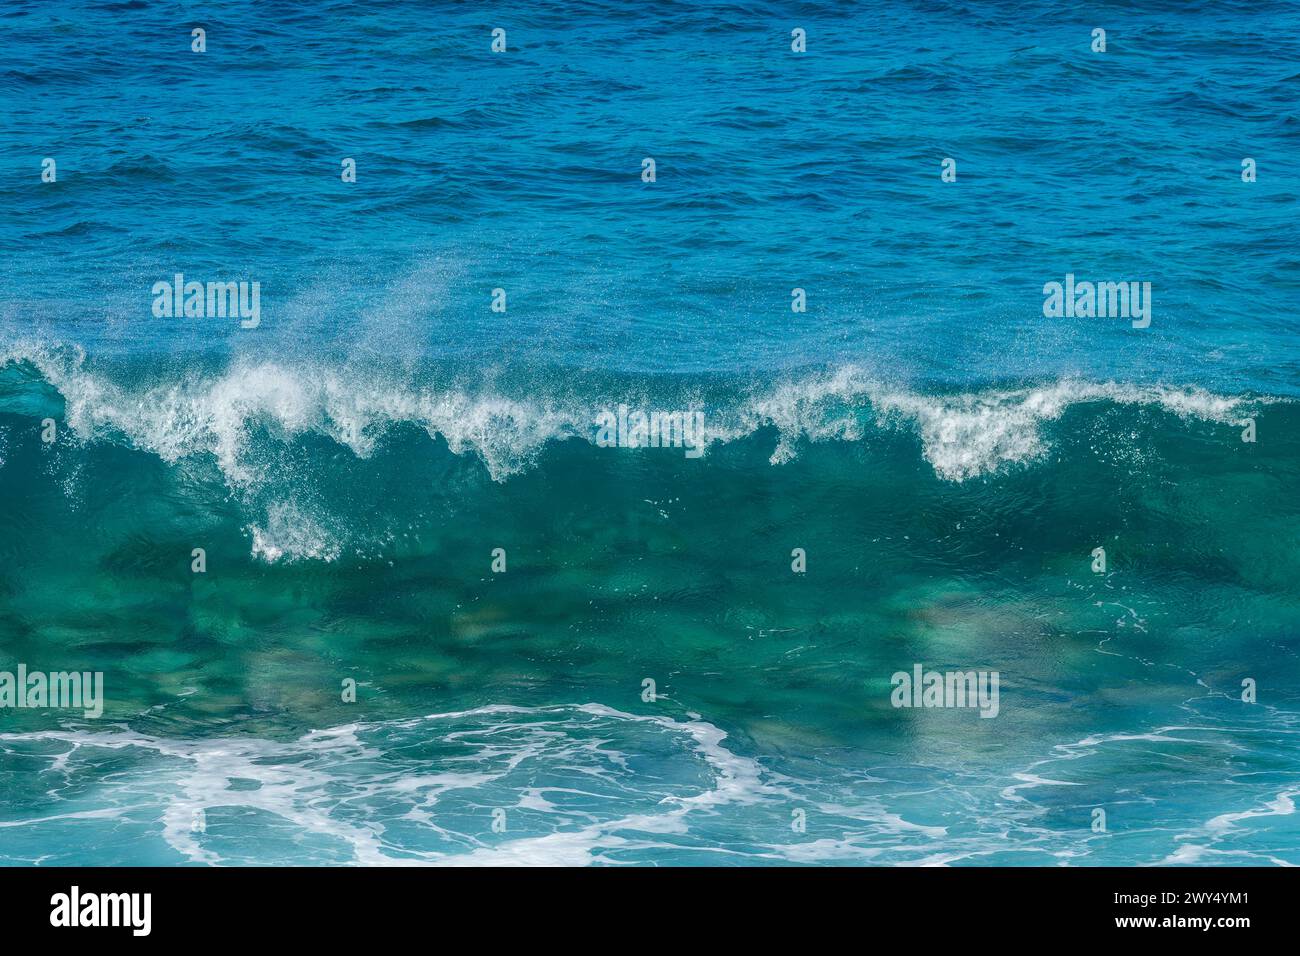 Front view of a crashing wave. Blue clear transparent water splash, ocean background. Stock Photo